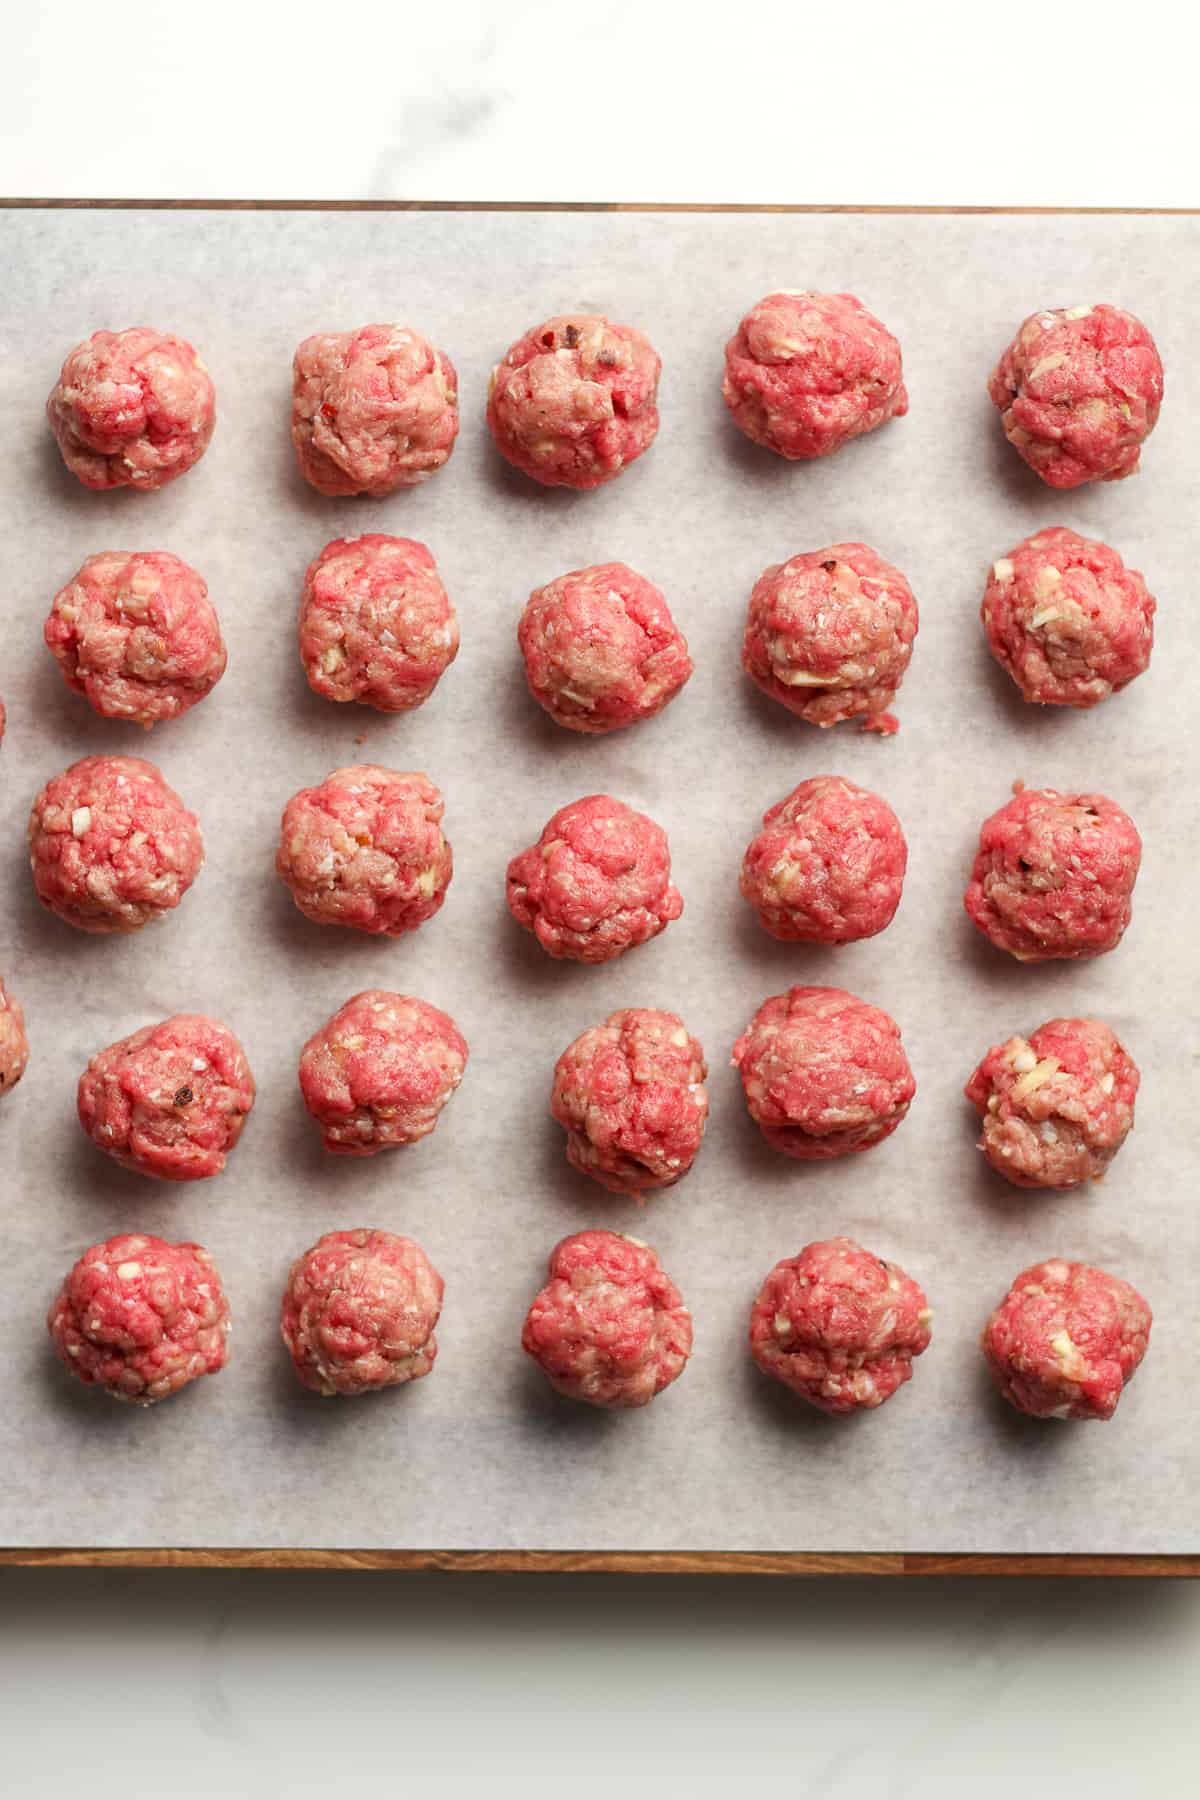 37 small meatballs on white parchment paper.